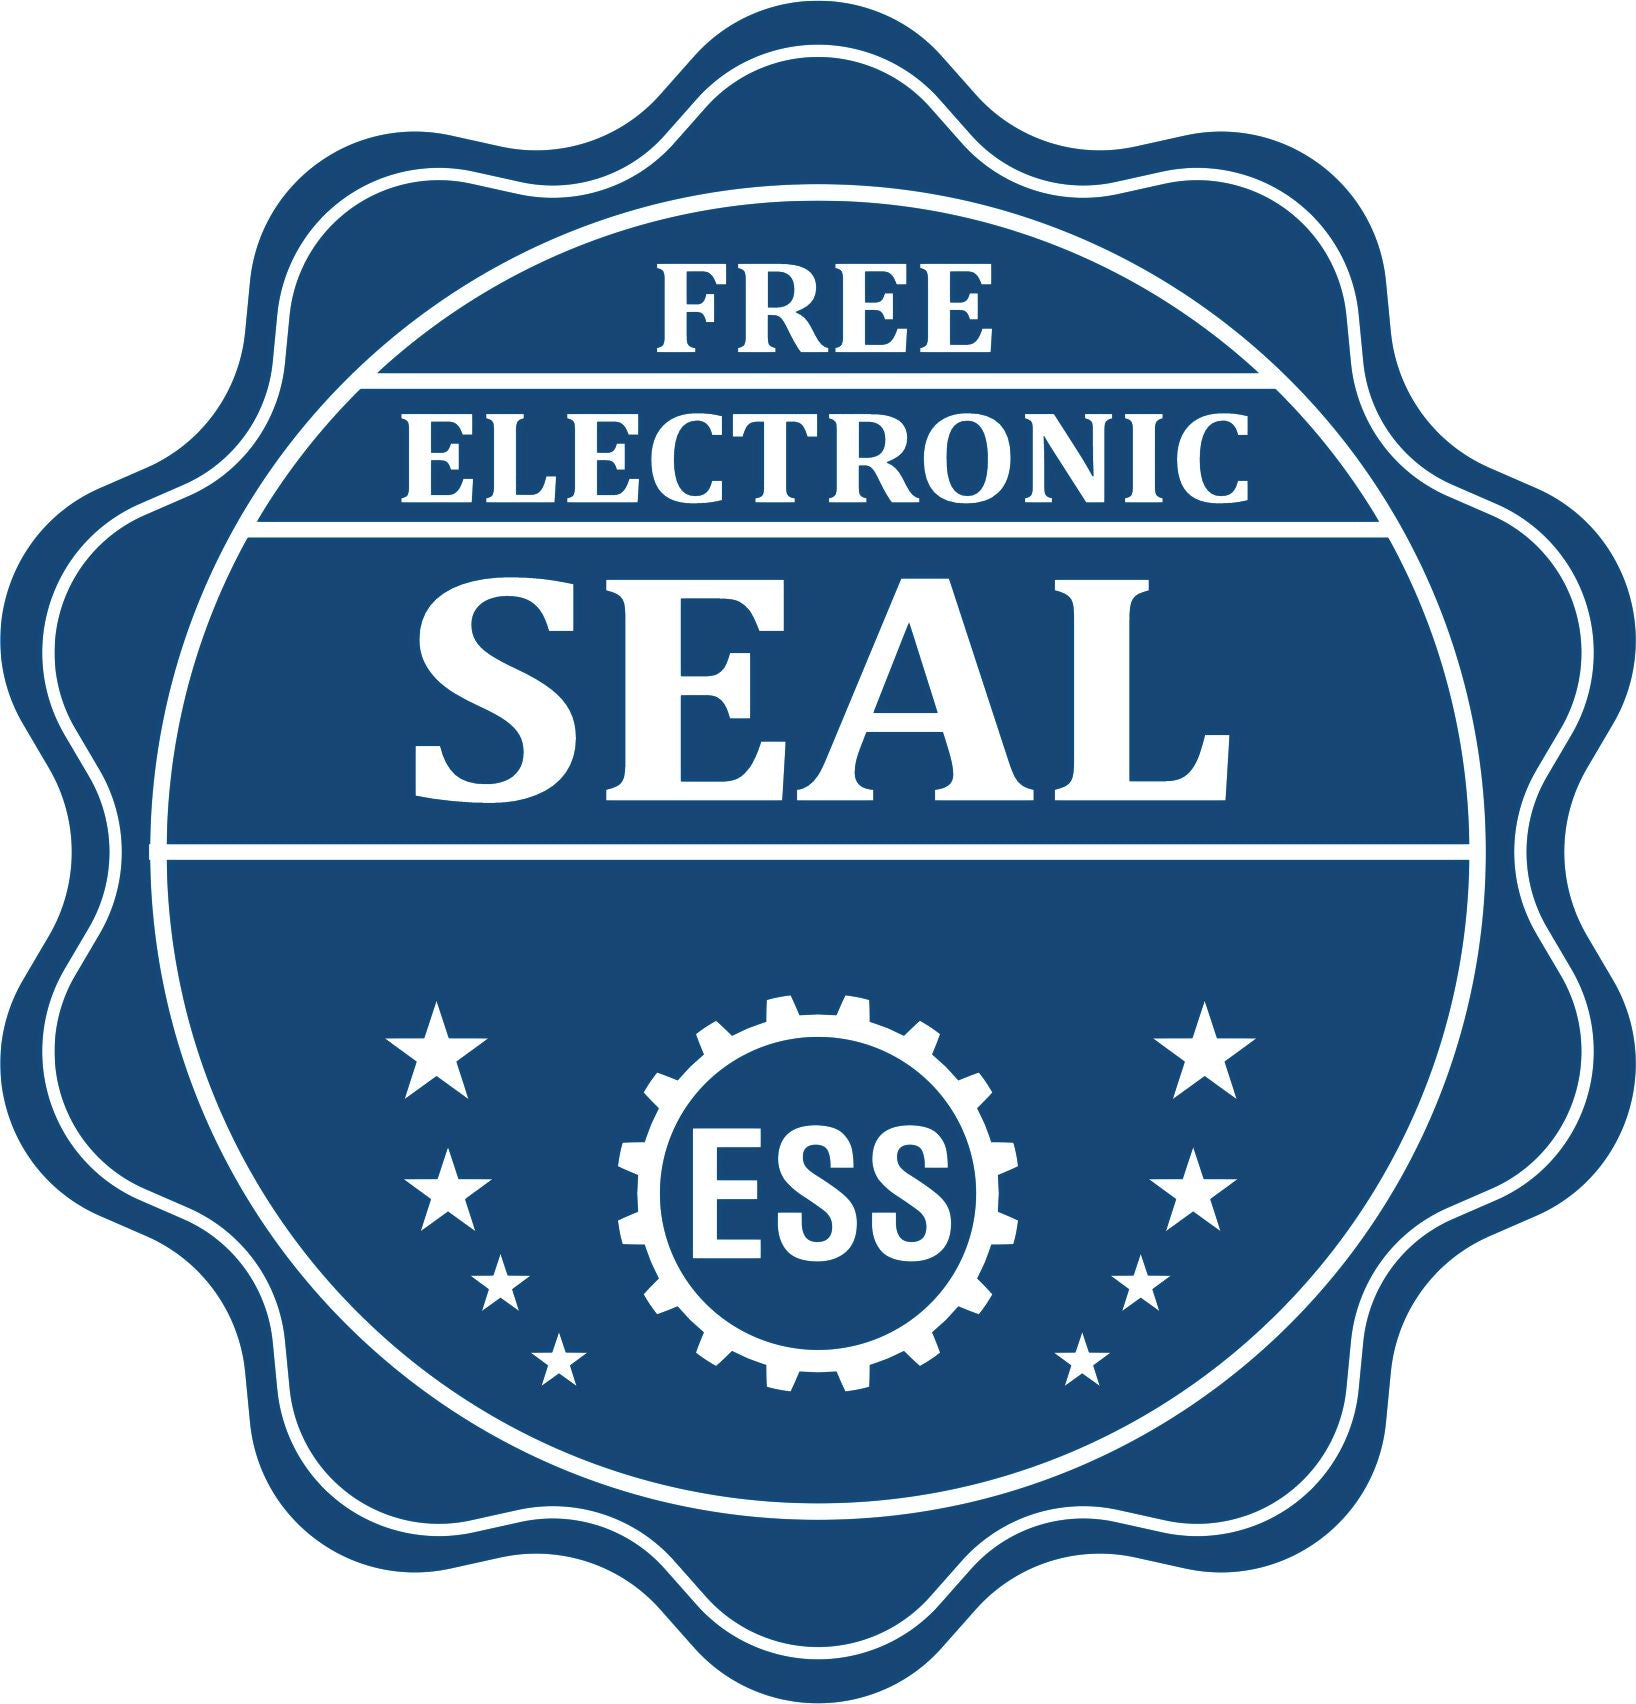 A badge showing a free electronic seal for the Premium MaxLight Pre-Inked Iowa Engineering Stamp with stars and the ESS gear on the emblem.